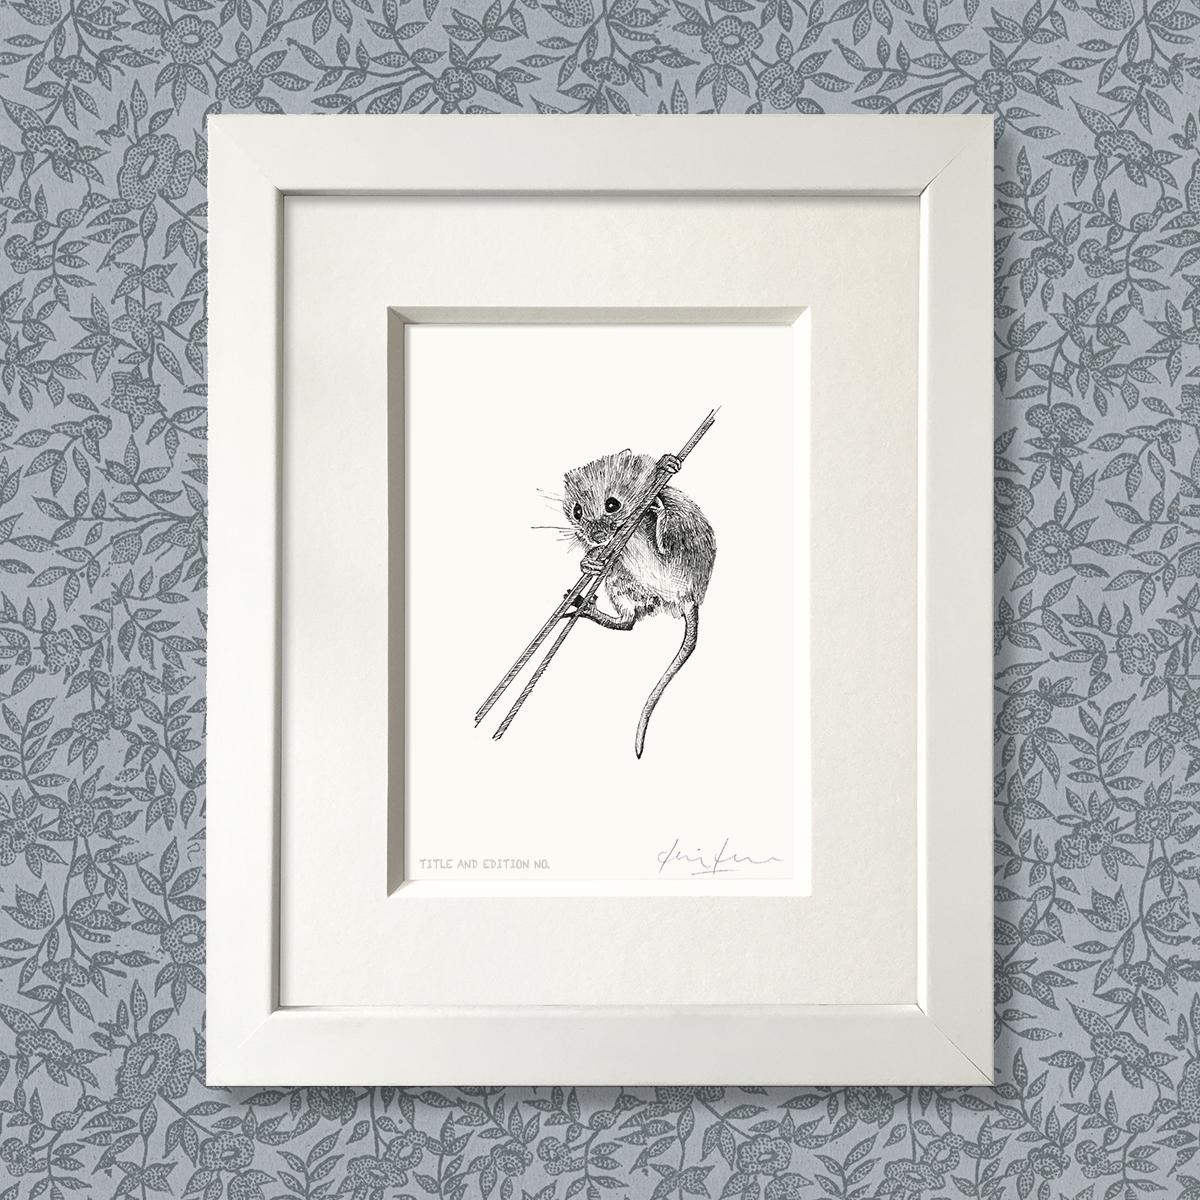 Limited edition print from pen and ink drawing of a harvest mouse in a white frame